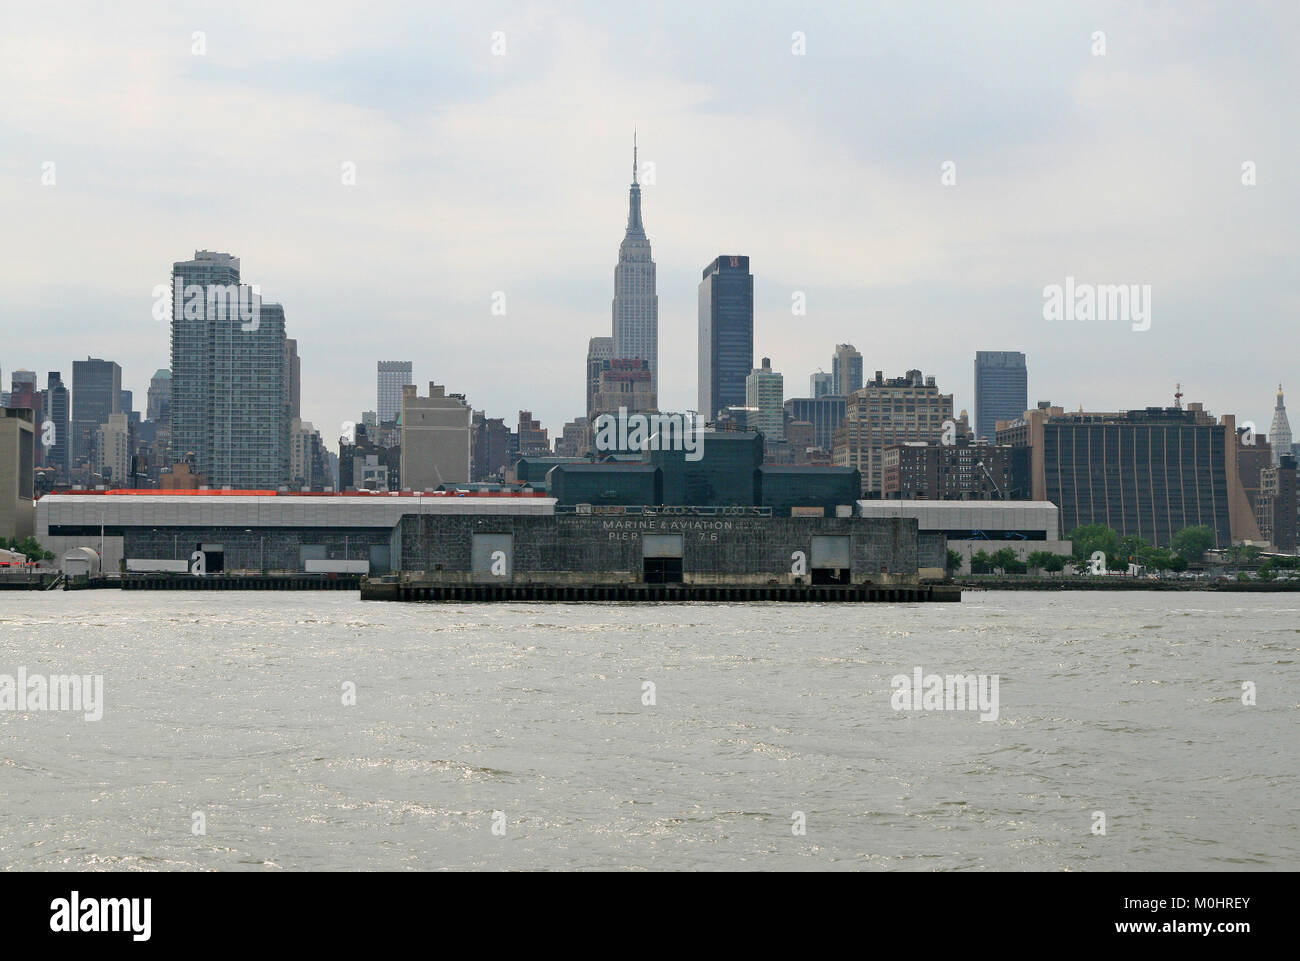 The Department of Marine & Aviation Pier 76 with Midtown Manhattan in the background seen from the Hudson River, New York City, New York State, USA. Stock Photo